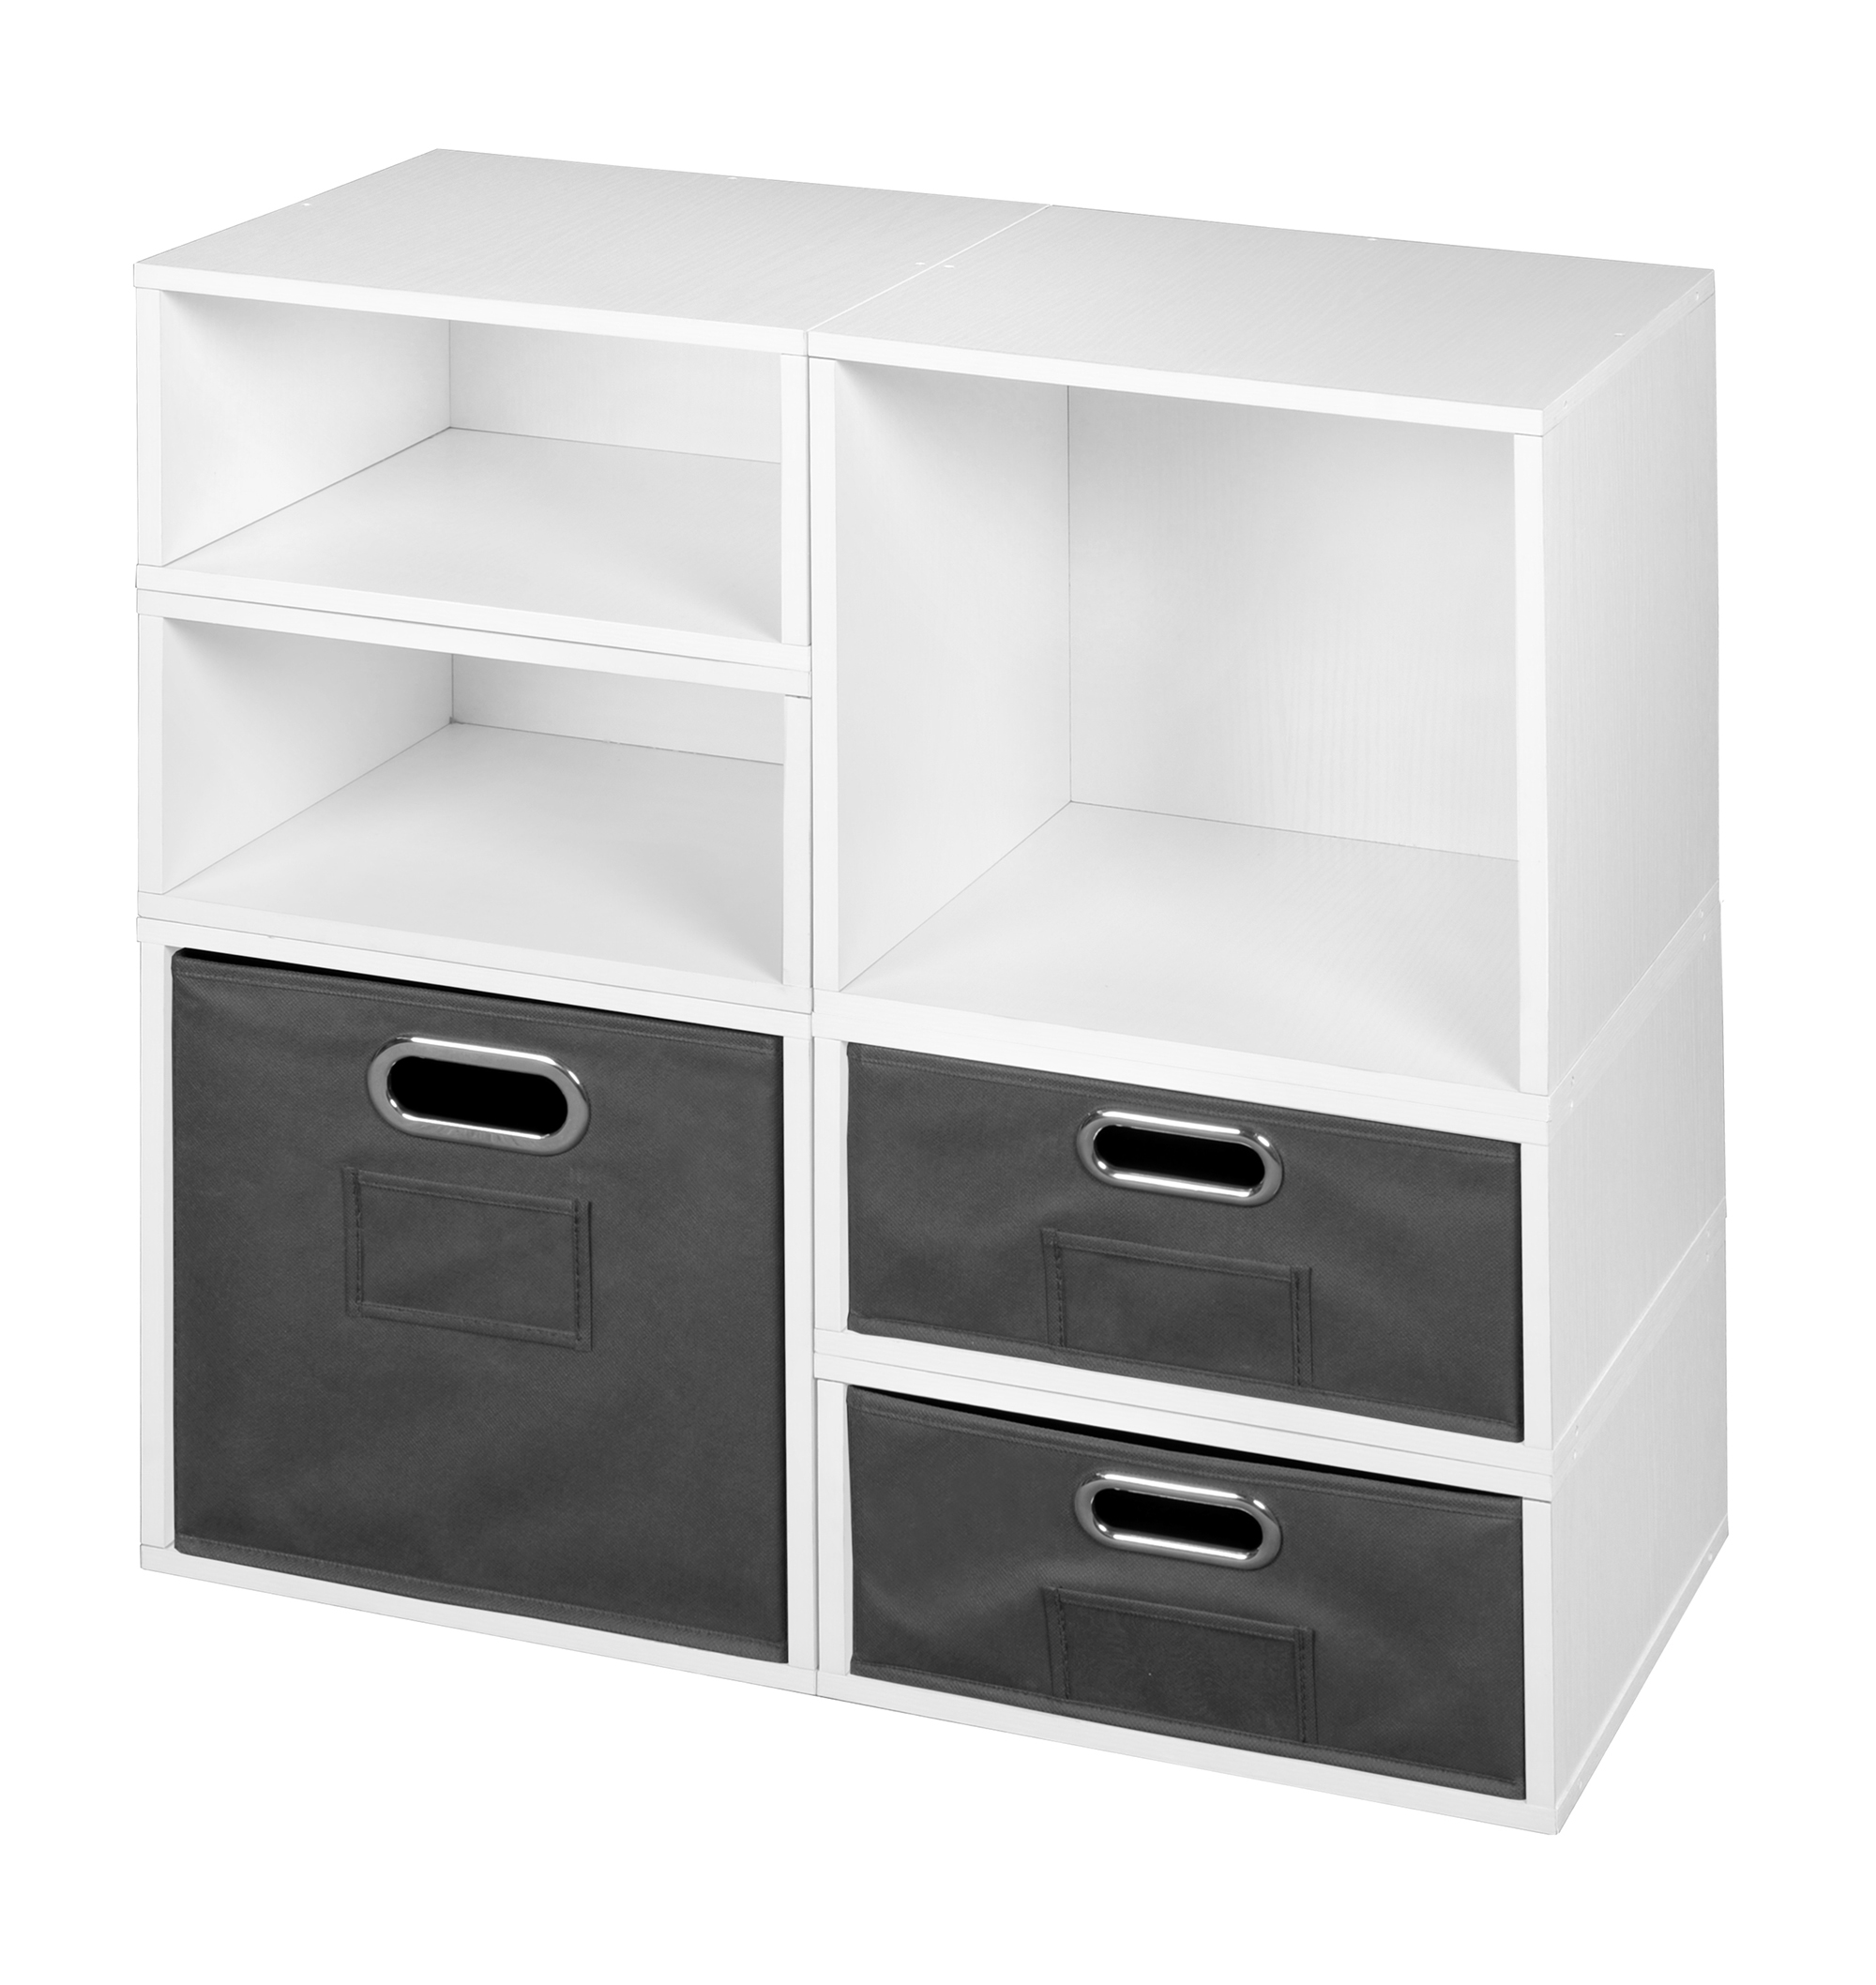 Niche Cubo Storage Set- 2 Full Cubes/4 Half Cubes with Foldable Storage Bins- White Wood Grain/Grey - image 3 of 8